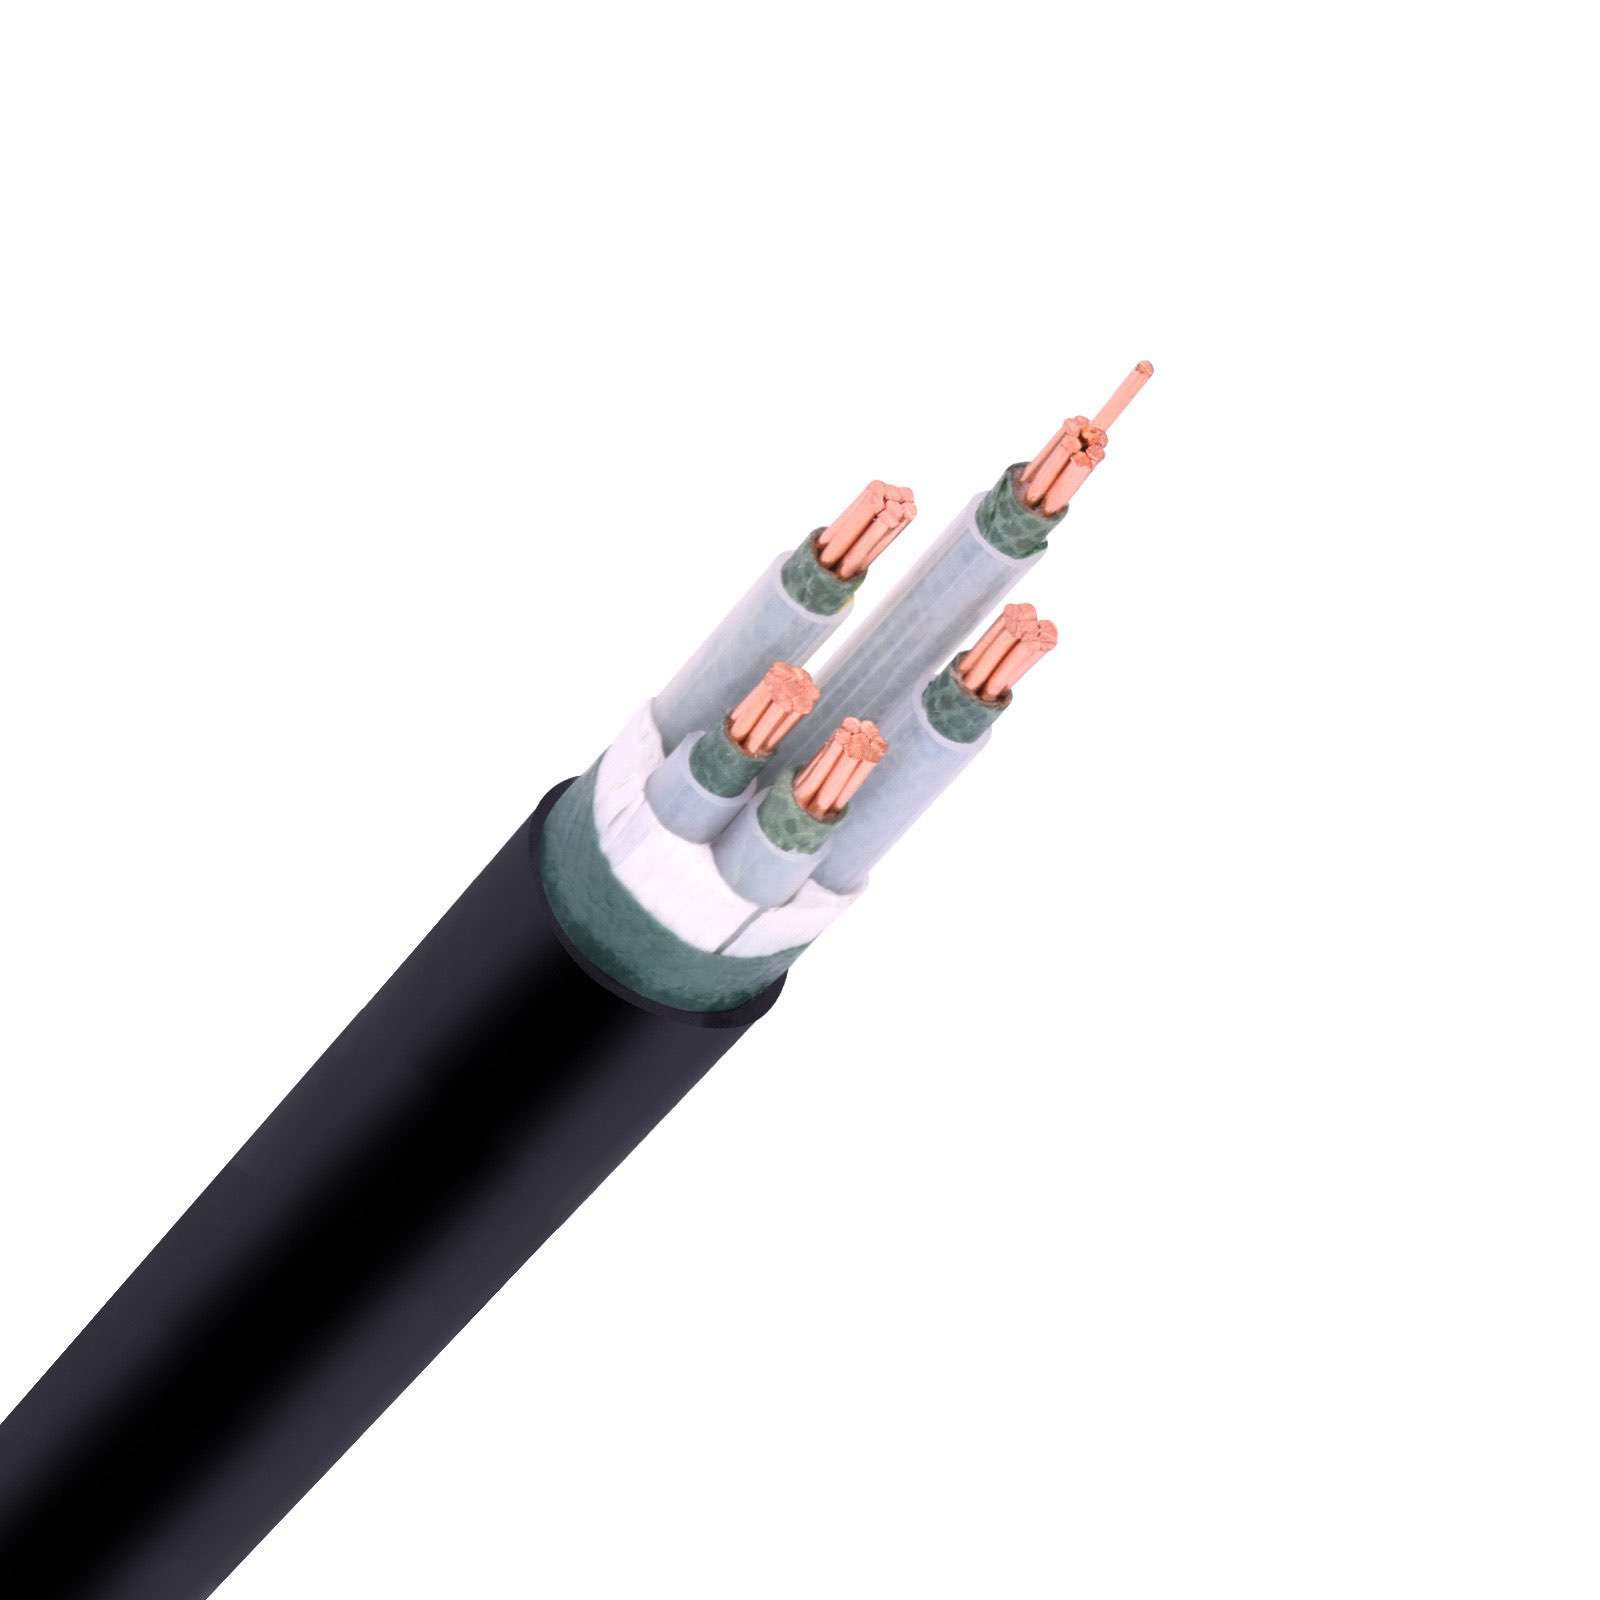 0.6/1KV XLPE Insulated and PVC Sheathed Fire Resistant Cable